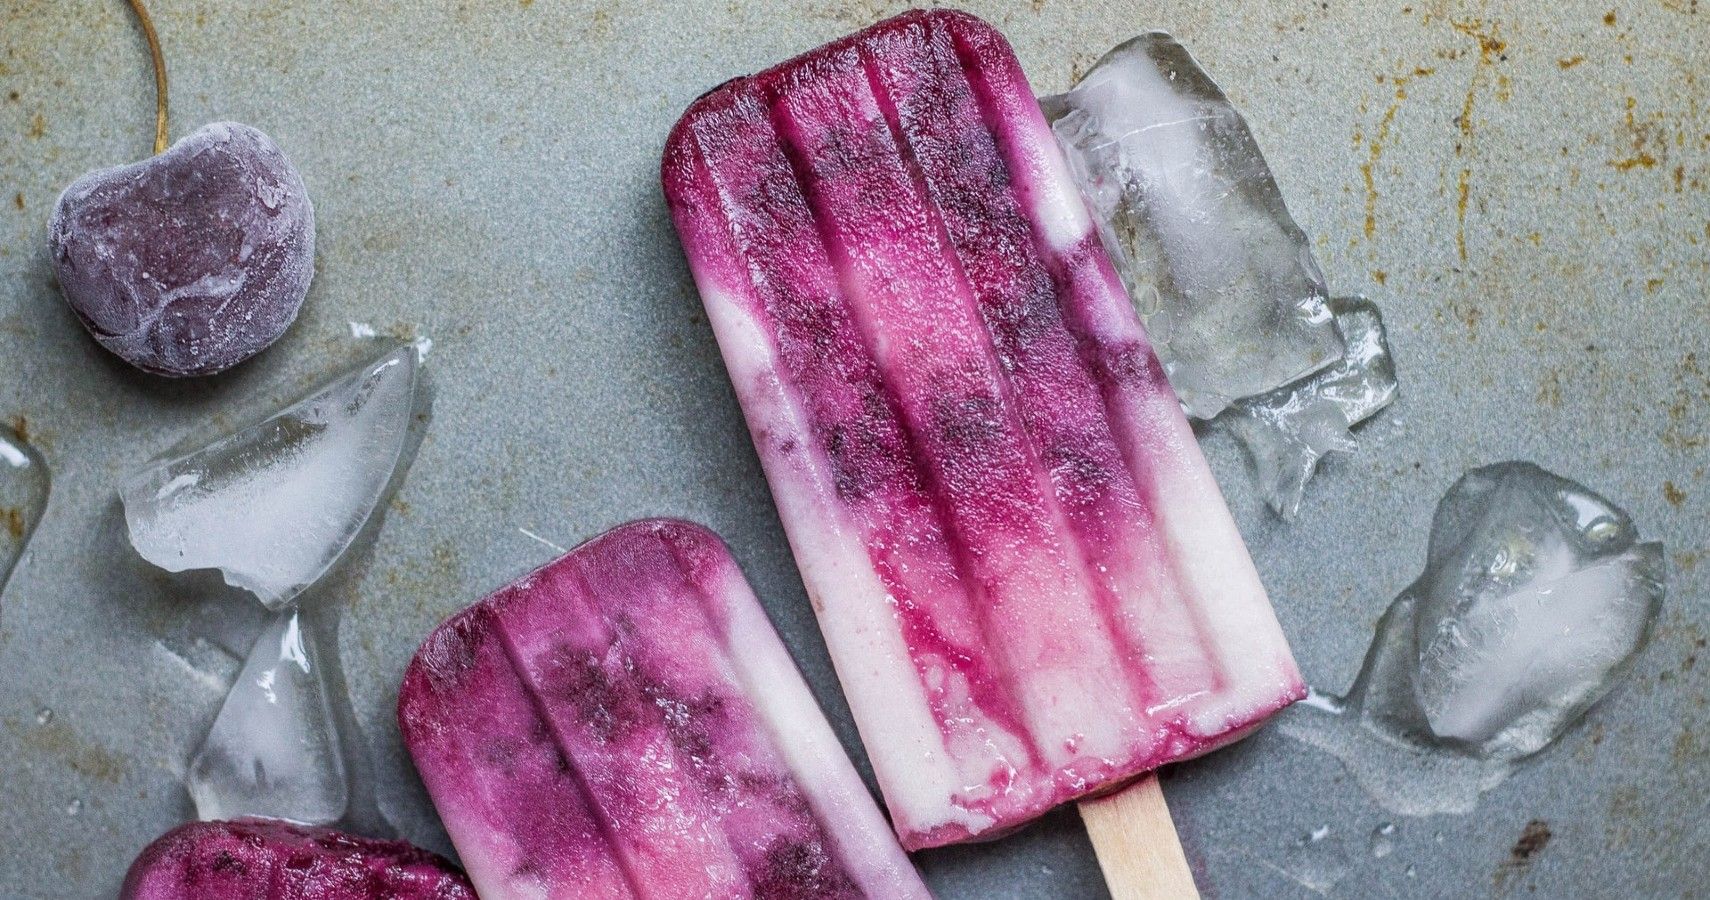 Delicious Fruity Popsicle Recipes To Try Right Now